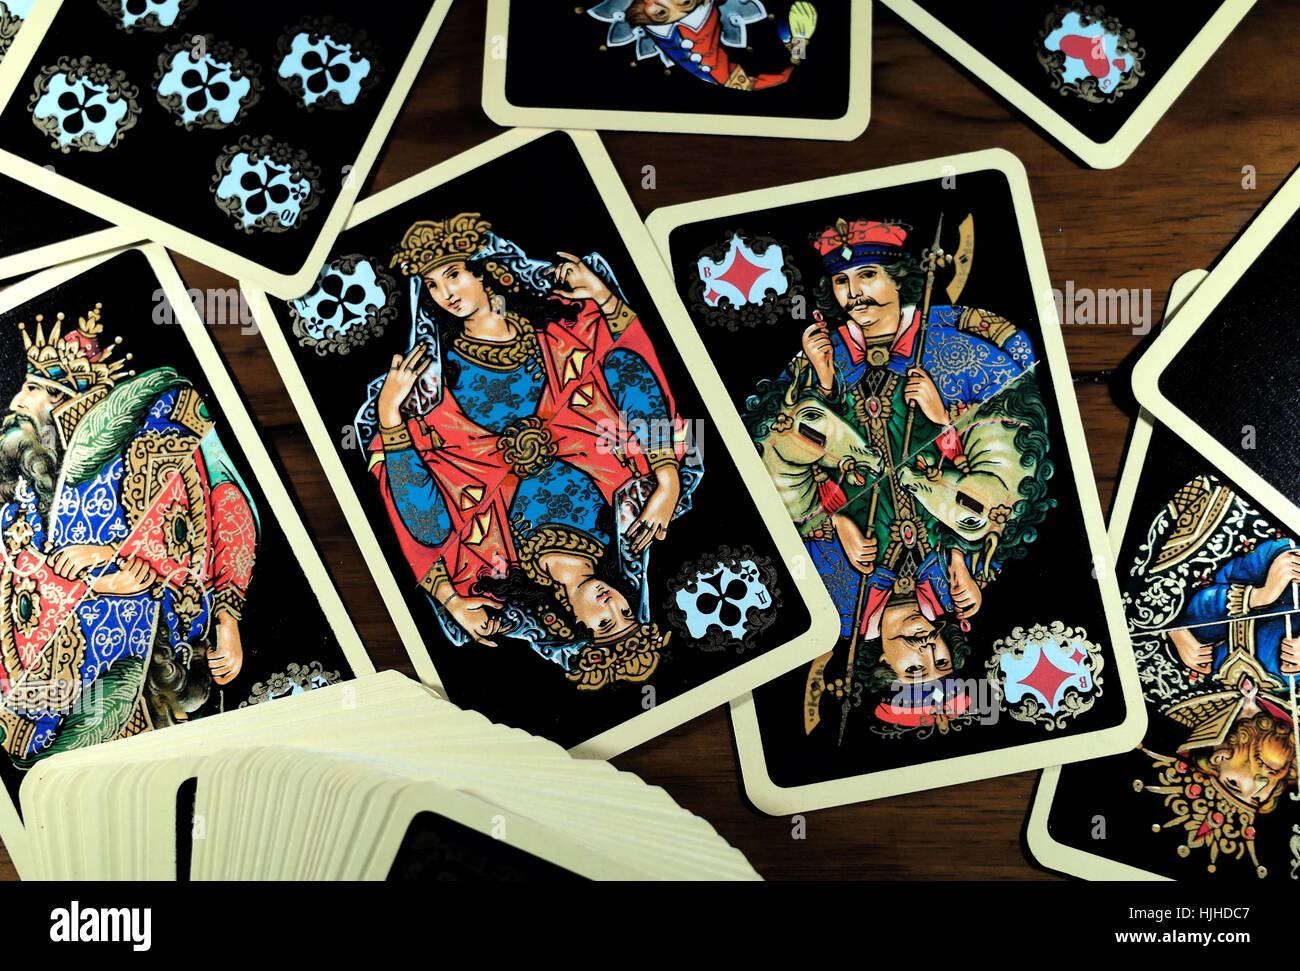 Russian playing cards Stock Photo - Alamy